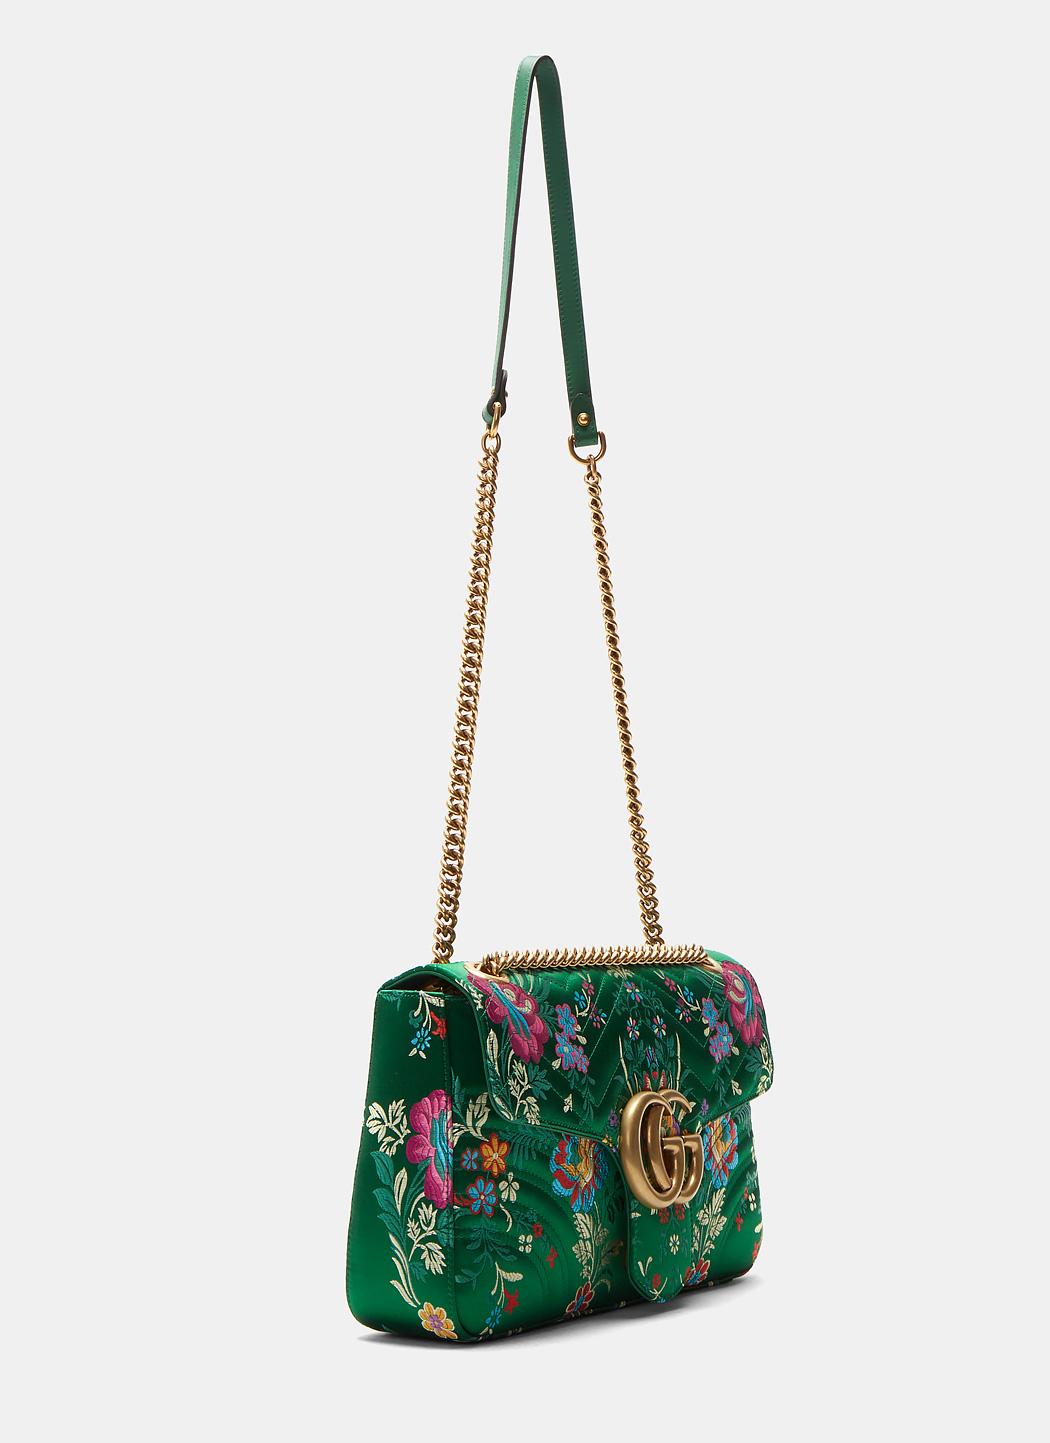 Gucci Gg Marmont Floral Jacquard Shoulder Bag in Green | Lyst